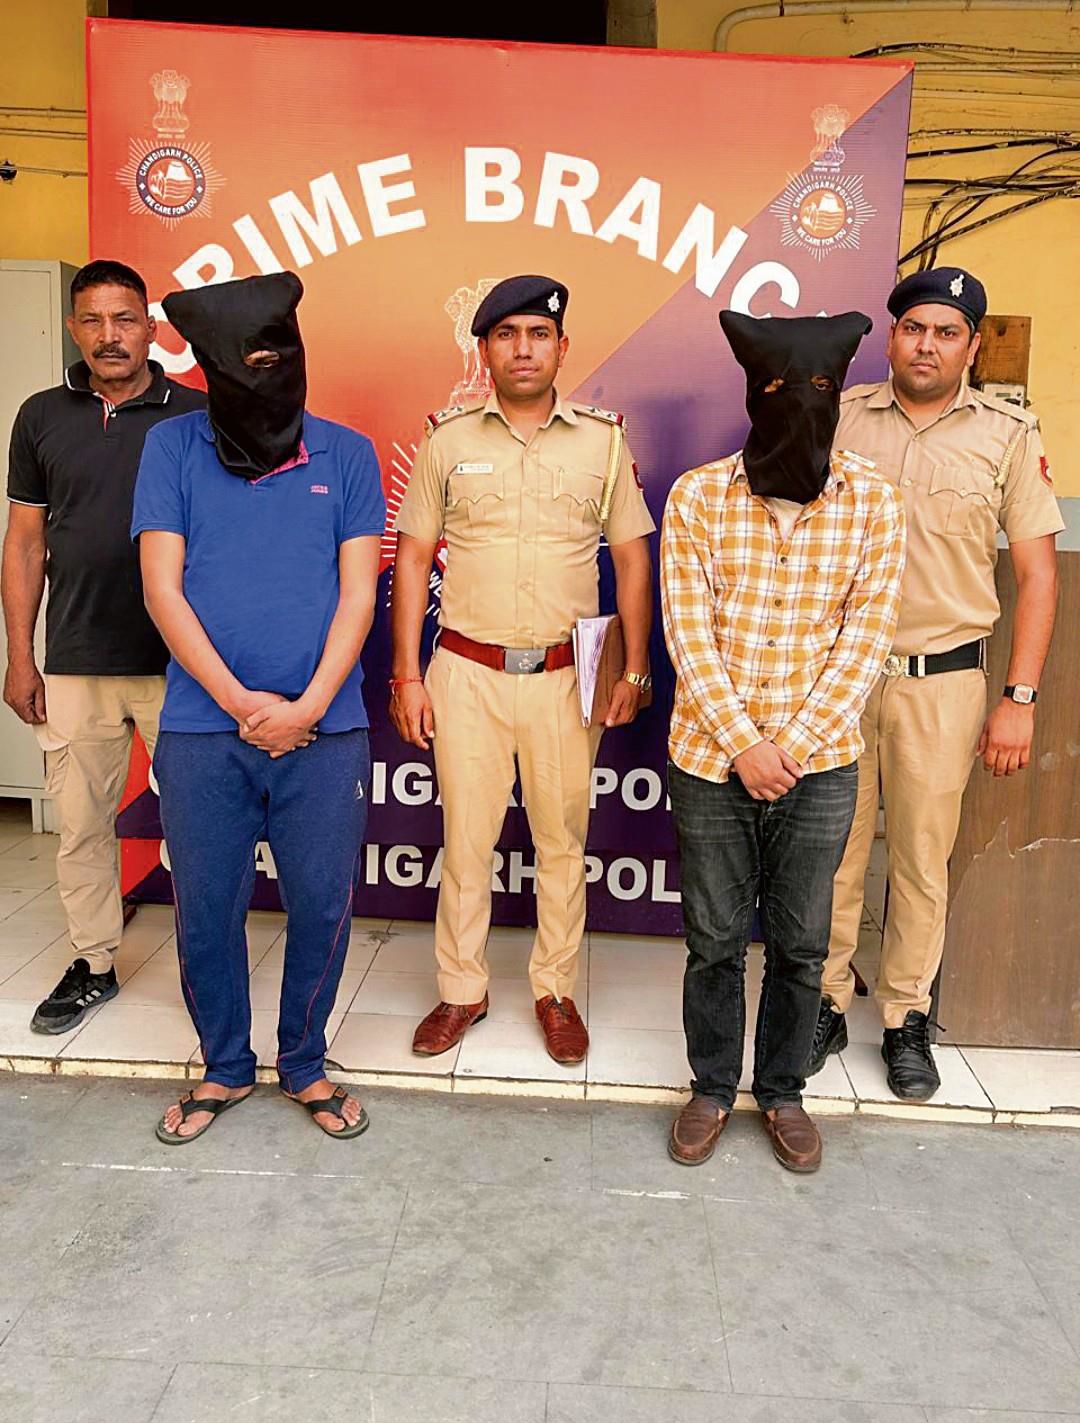 BTech graduate among 2 peddlers arrested by Chandigarh police with 774 grams of heroin